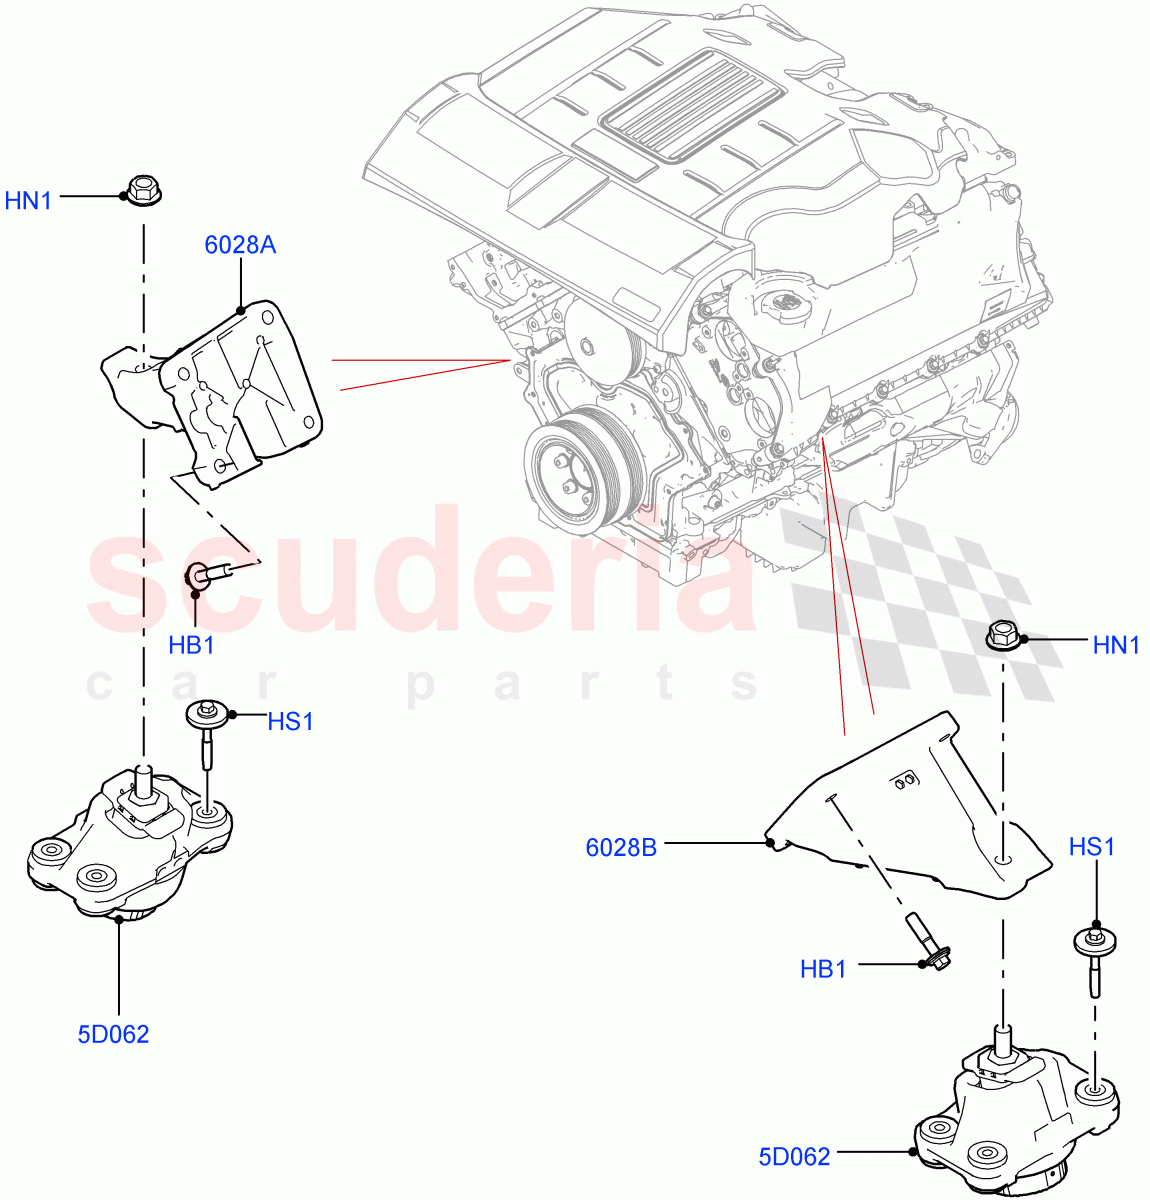 Engine Mounting(Solihull Plant Build)(3.0L DOHC GDI SC V6 PETROL)((V)FROMHA000001) of Land Rover Land Rover Discovery 5 (2017+) [3.0 Diesel 24V DOHC TC]